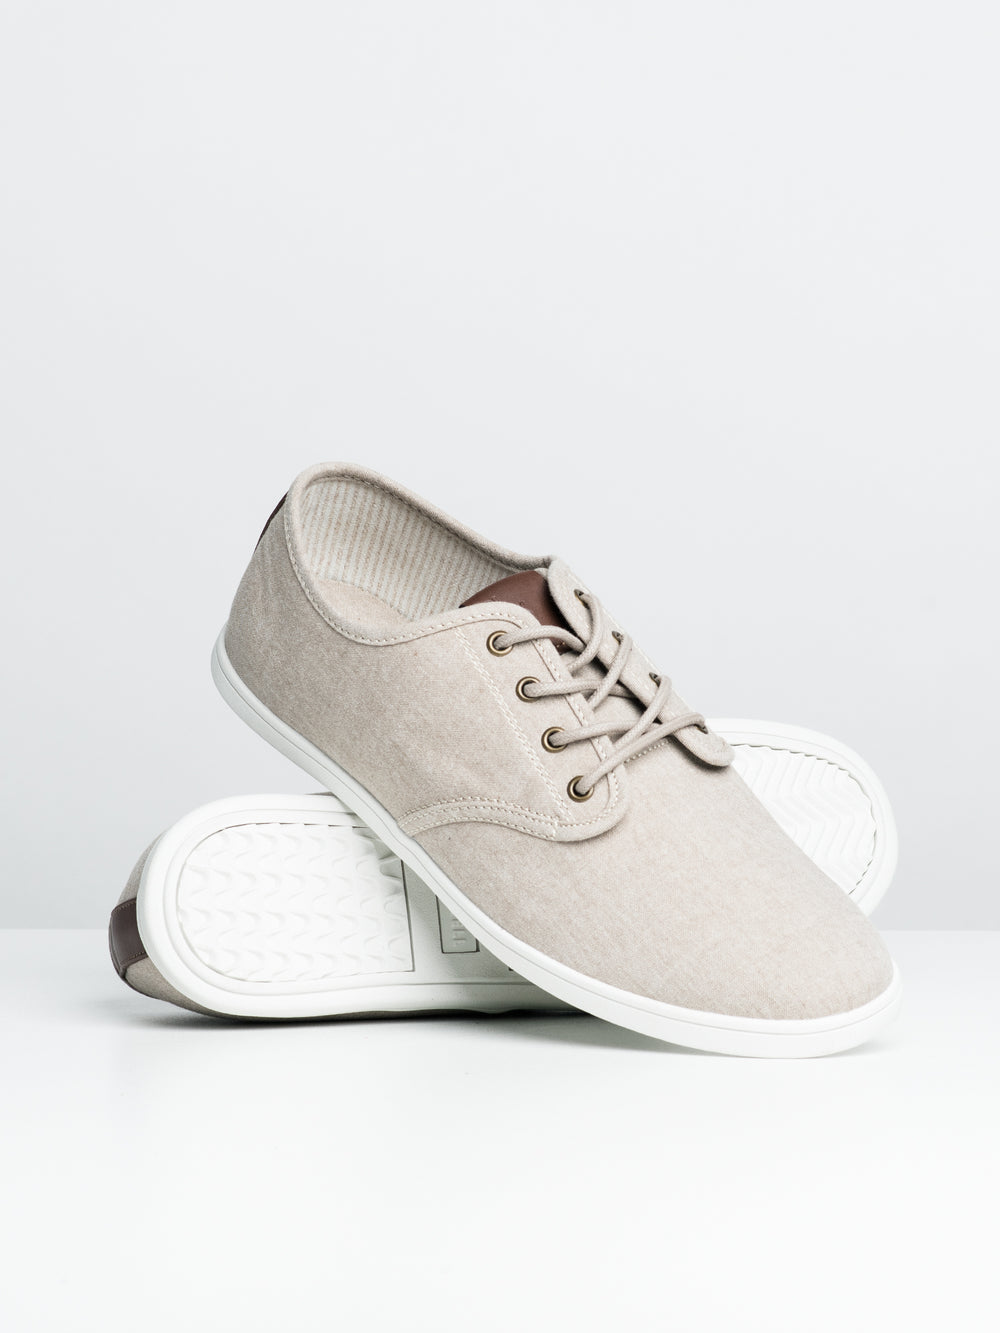 CHAUSSURE BLACKWELL JAKE POUR HOMME - LIQUIDATION